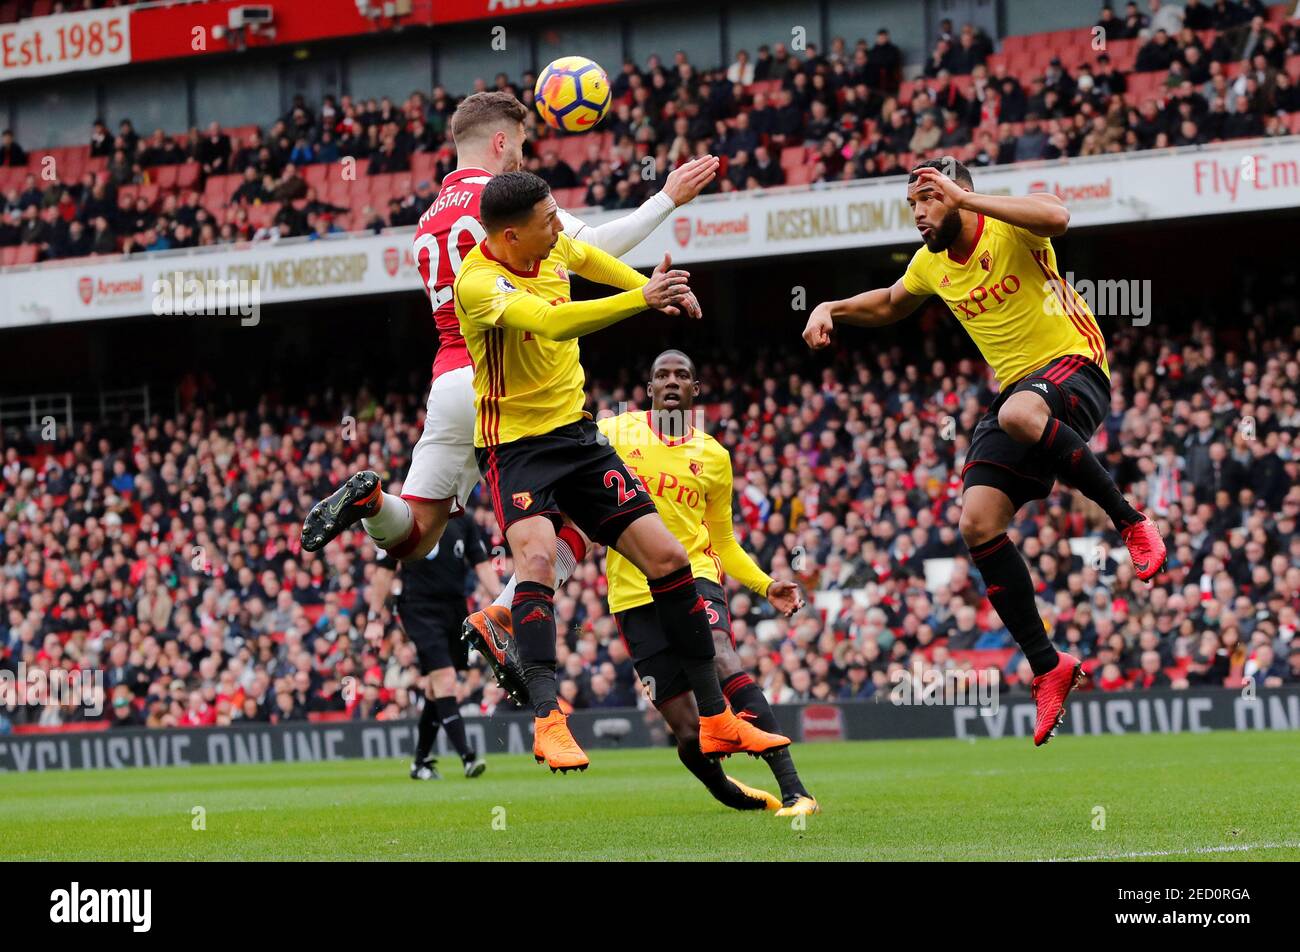 Soccer Football - Premier League - Arsenal vs Watford - Emirates Stadium, London, Britain - March 11, 2018   Arsenal's Shkodran Mustafi scores their first goal        REUTERS/Eddie Keogh    EDITORIAL USE ONLY. No use with unauthorized audio, video, data, fixture lists, club/league logos or "live" services. Online in-match use limited to 75 images, no video emulation. No use in betting, games or single club/league/player publications.  Please contact your account representative for further details. Stock Photo